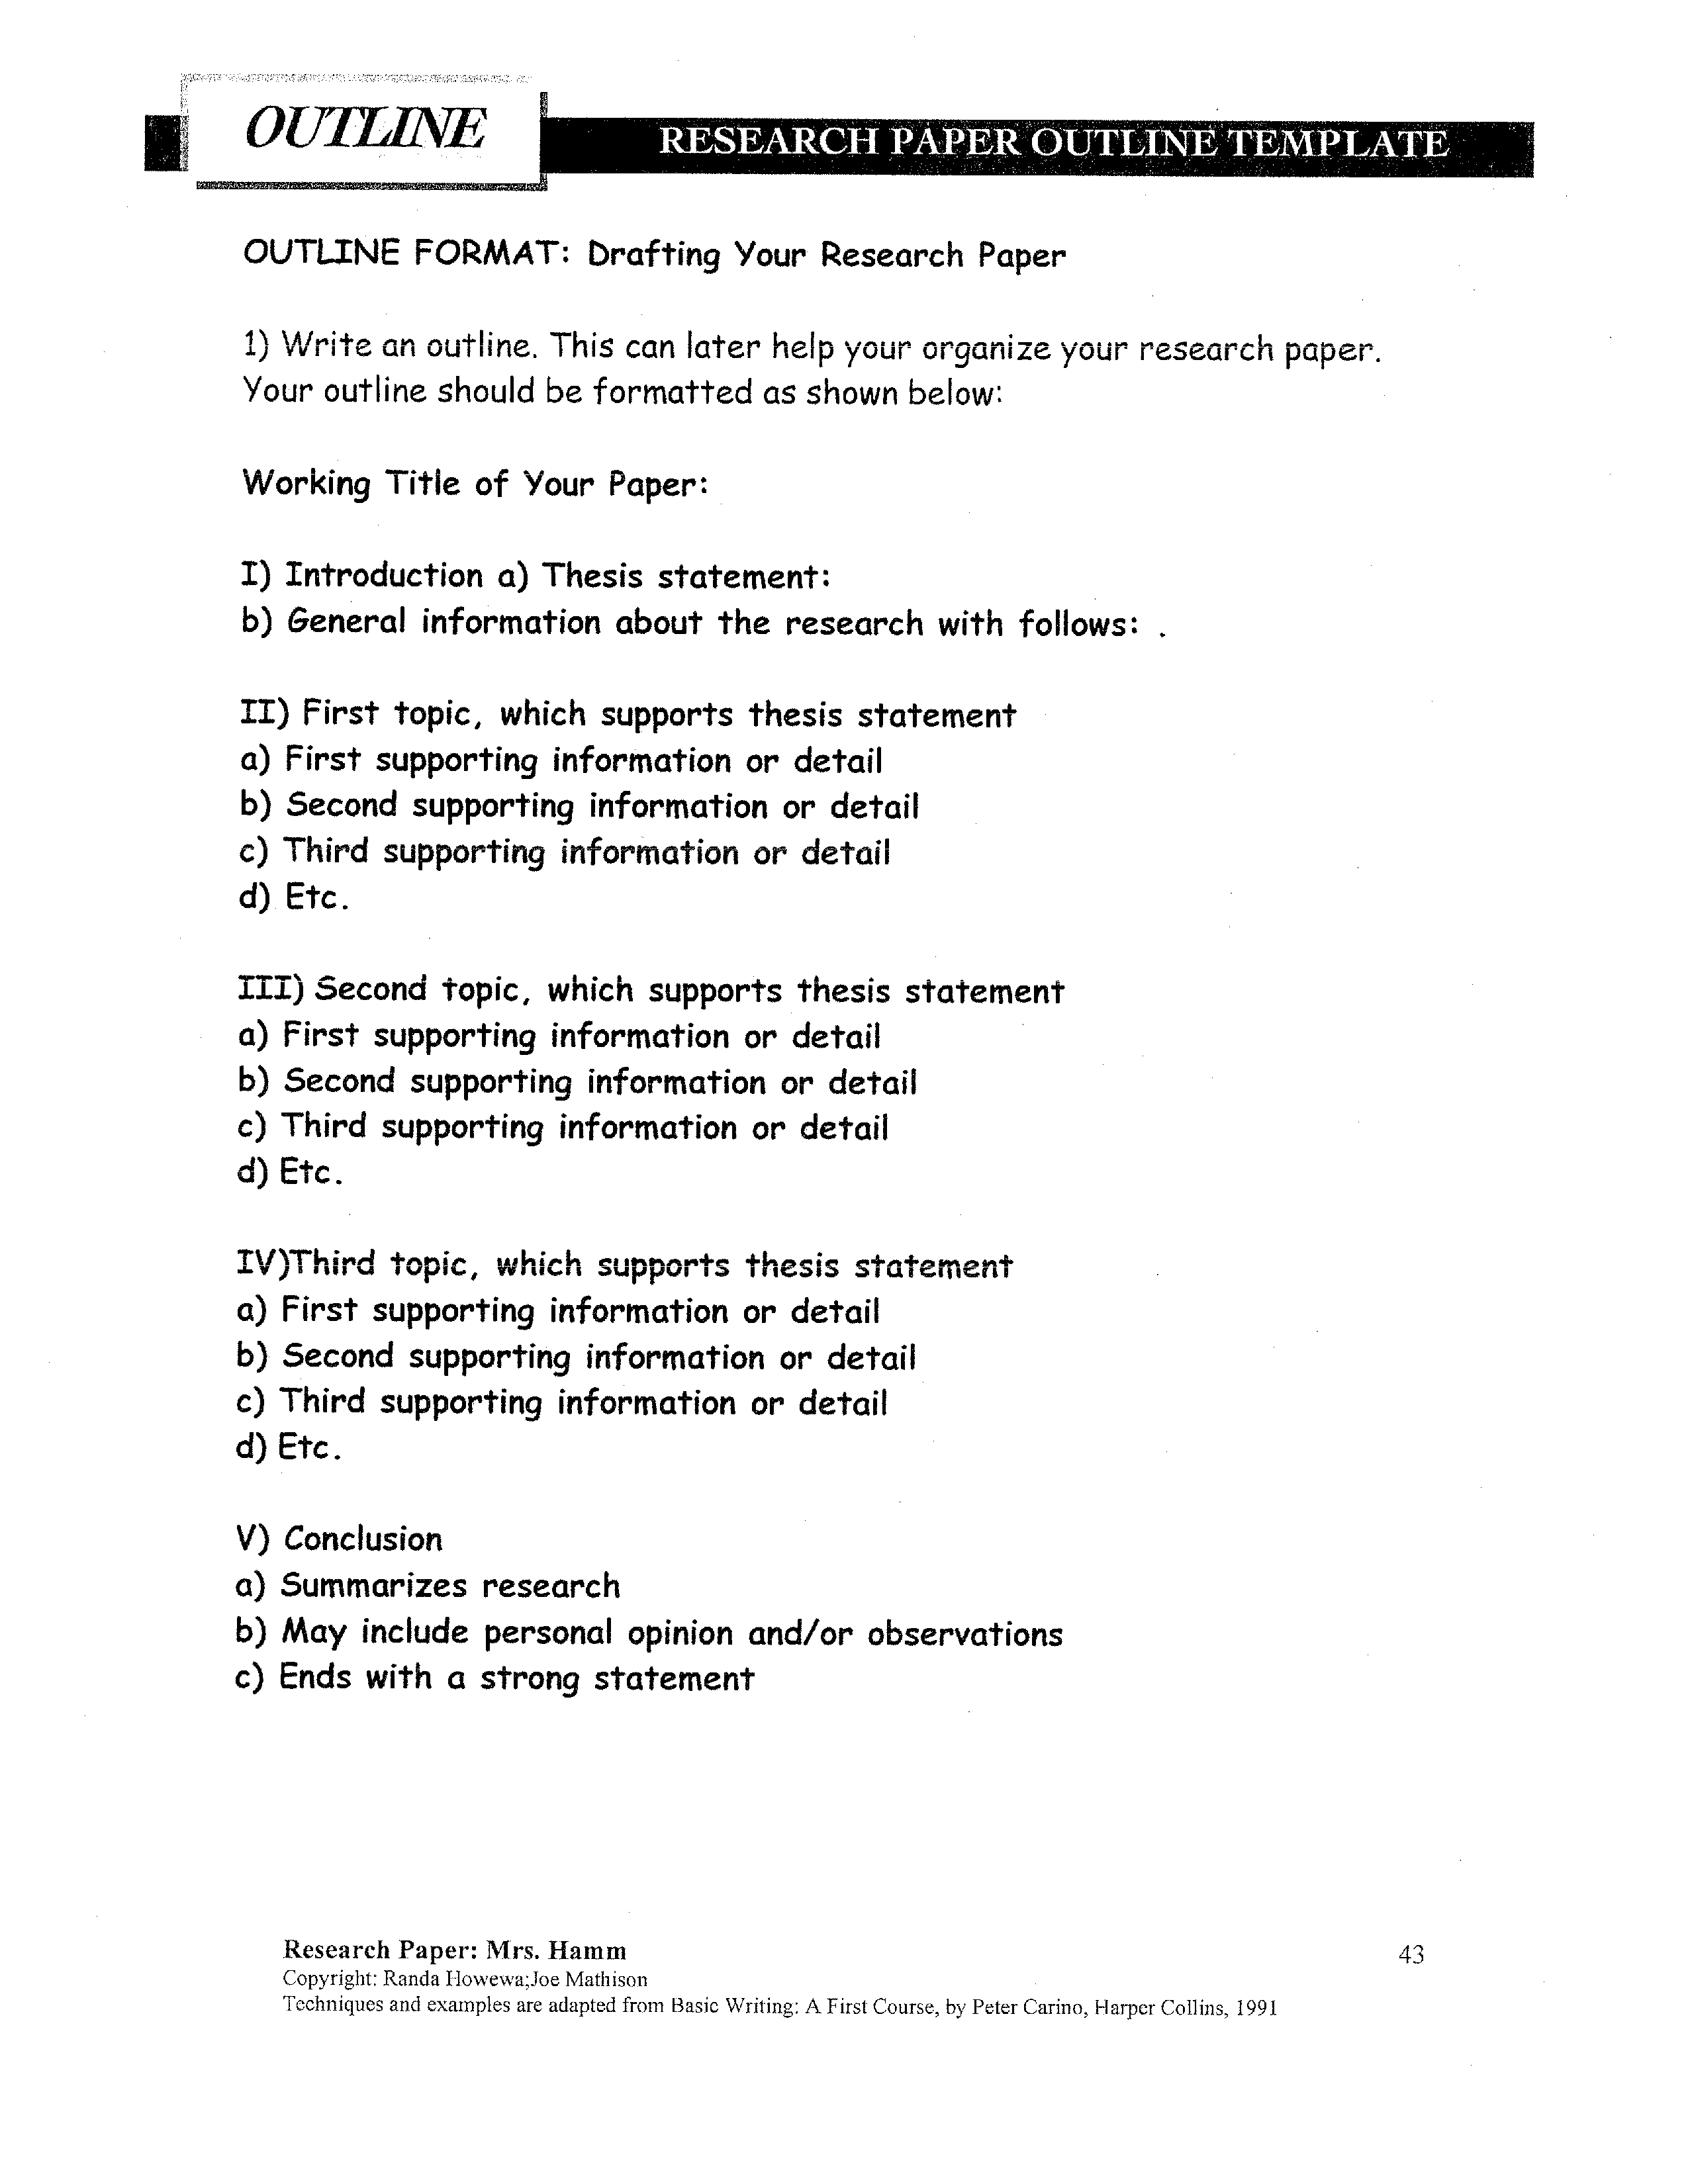 sample outline of research paper